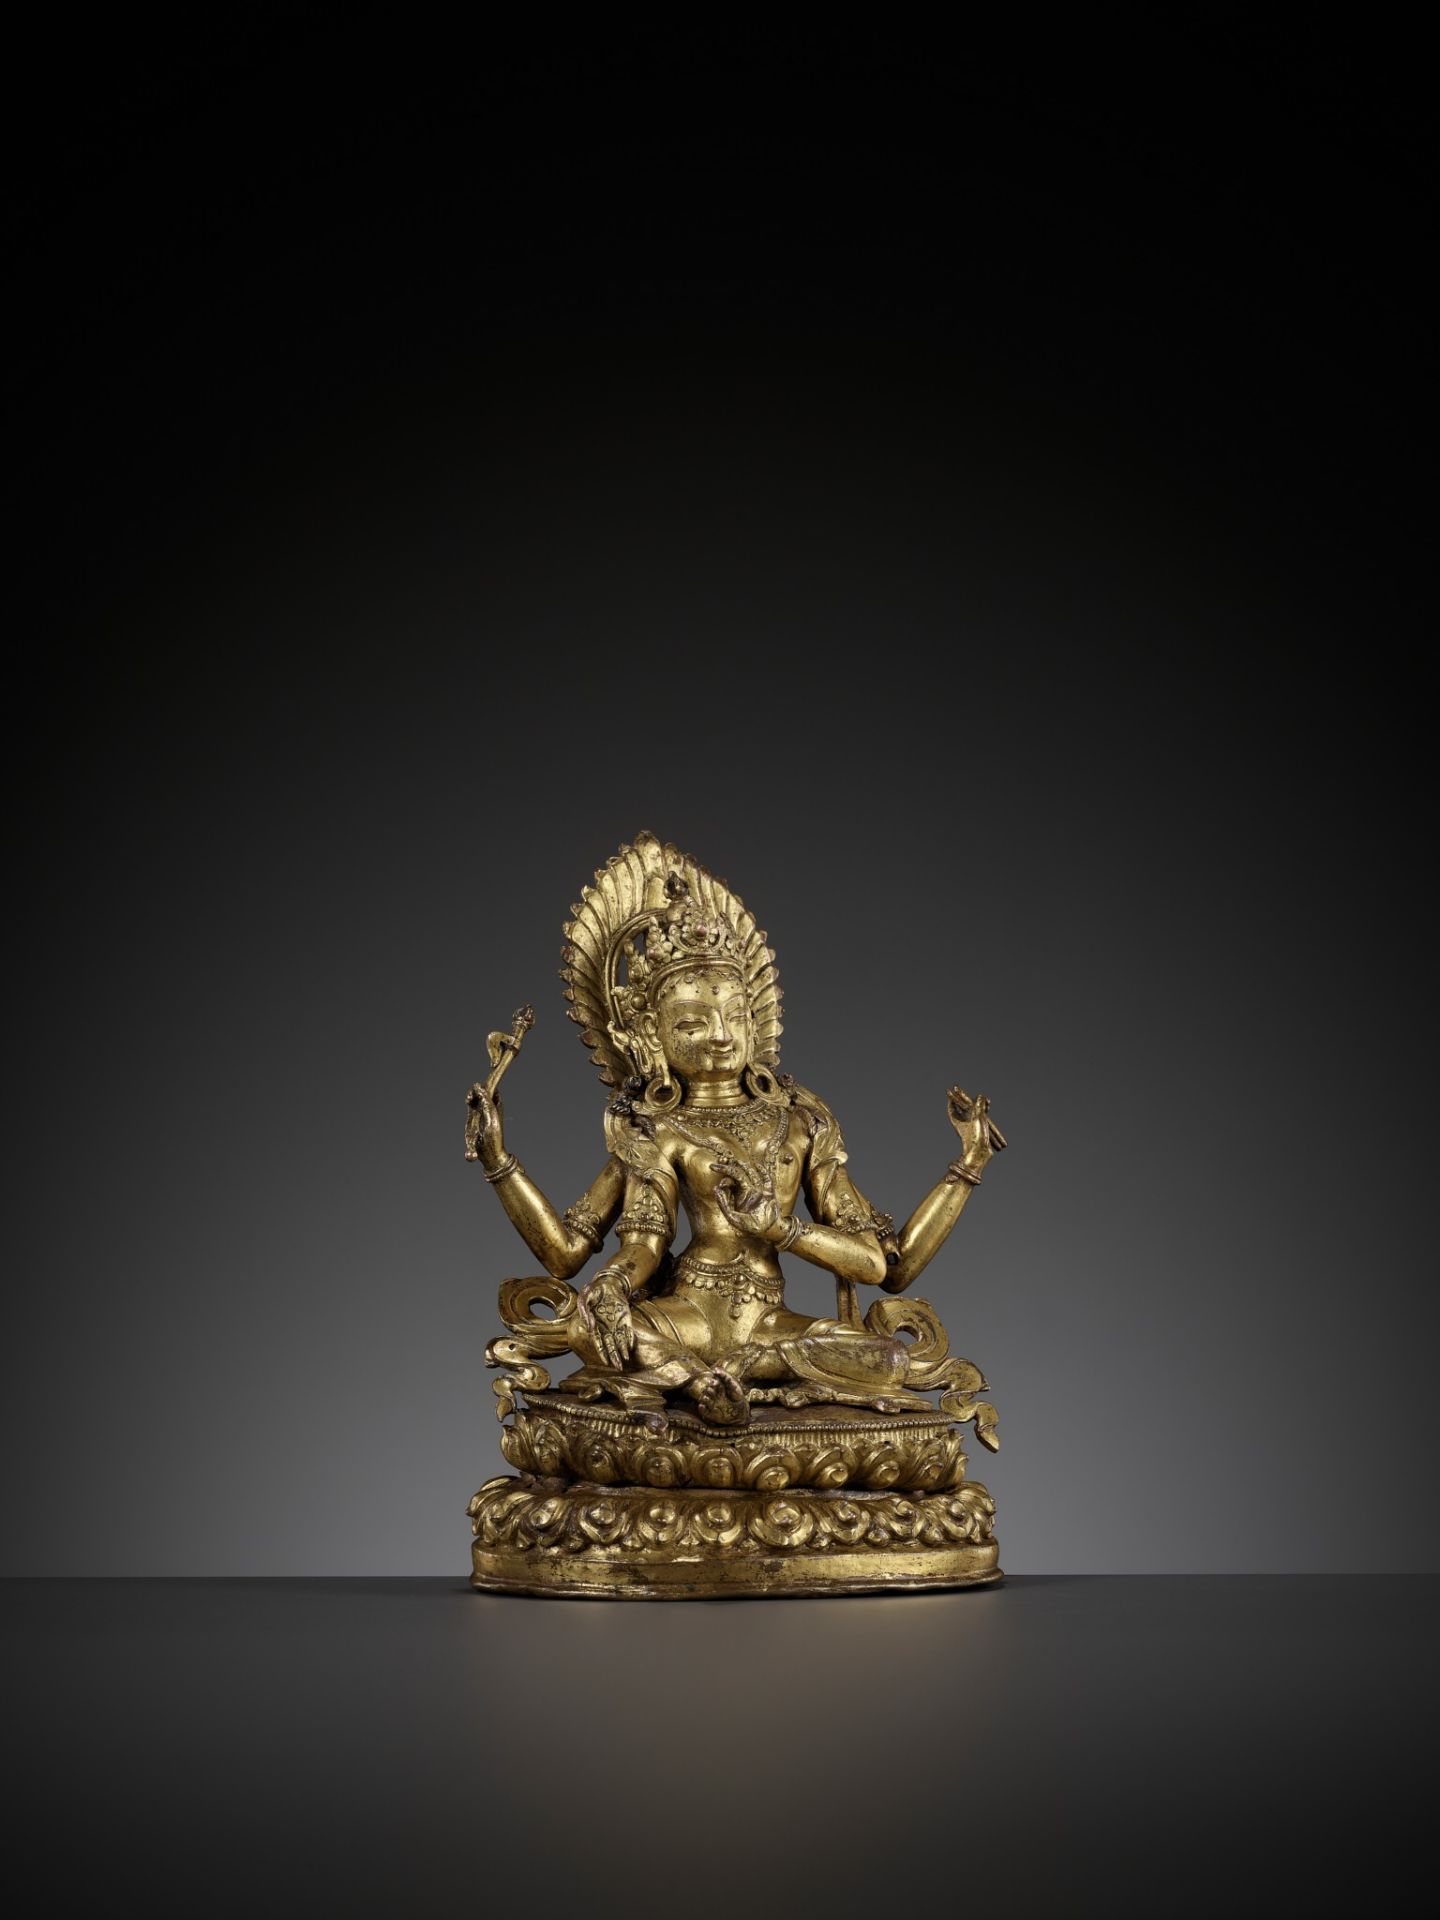 A CAST AND REPOUSSE GILT COPPER ALLOY FIGURE OF TARA, NEPAL, 18TH-19TH CENTURY - Image 12 of 13